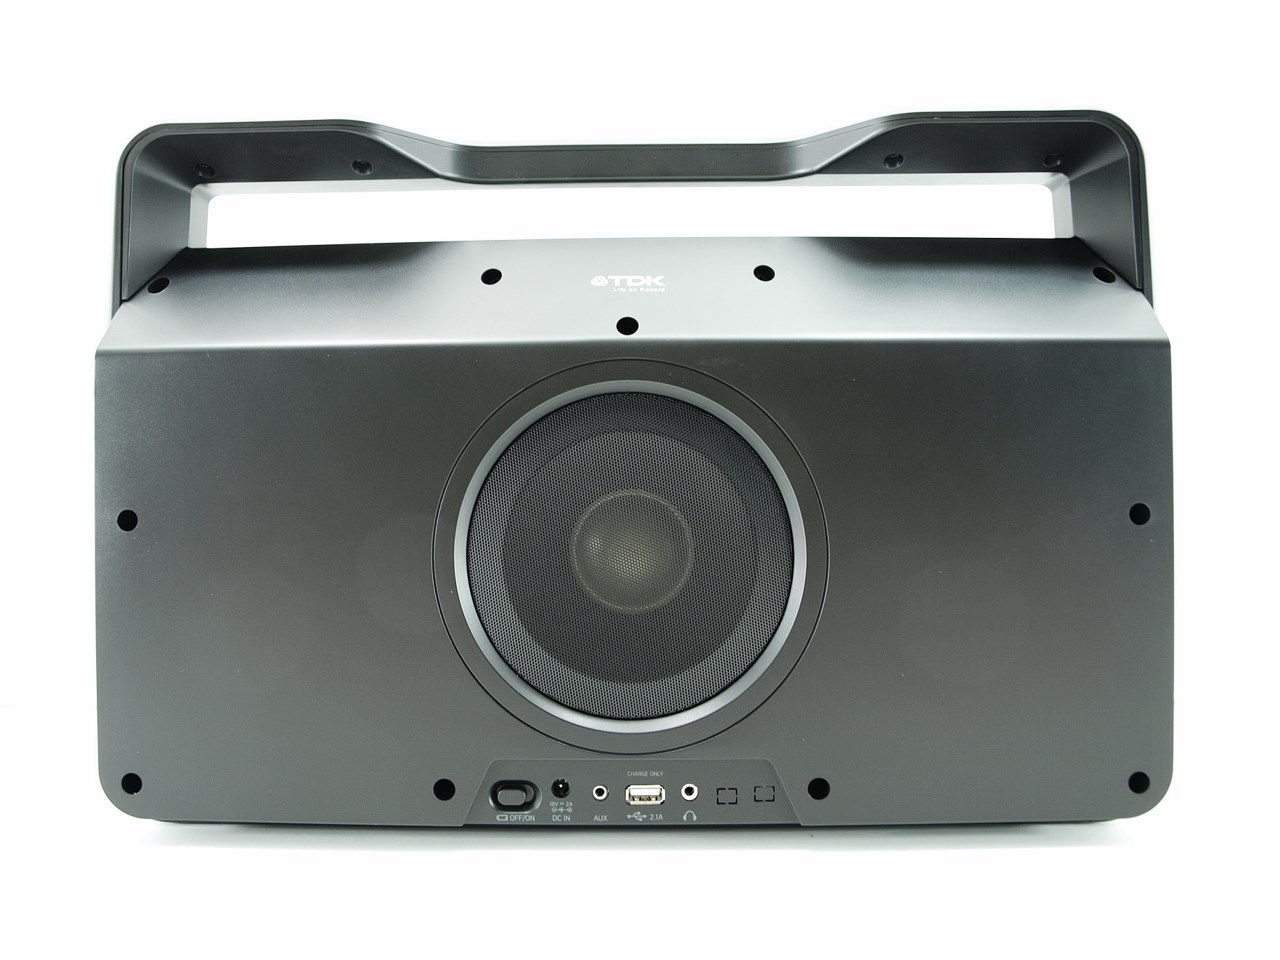 TDK A73 Wireless Boombox Review